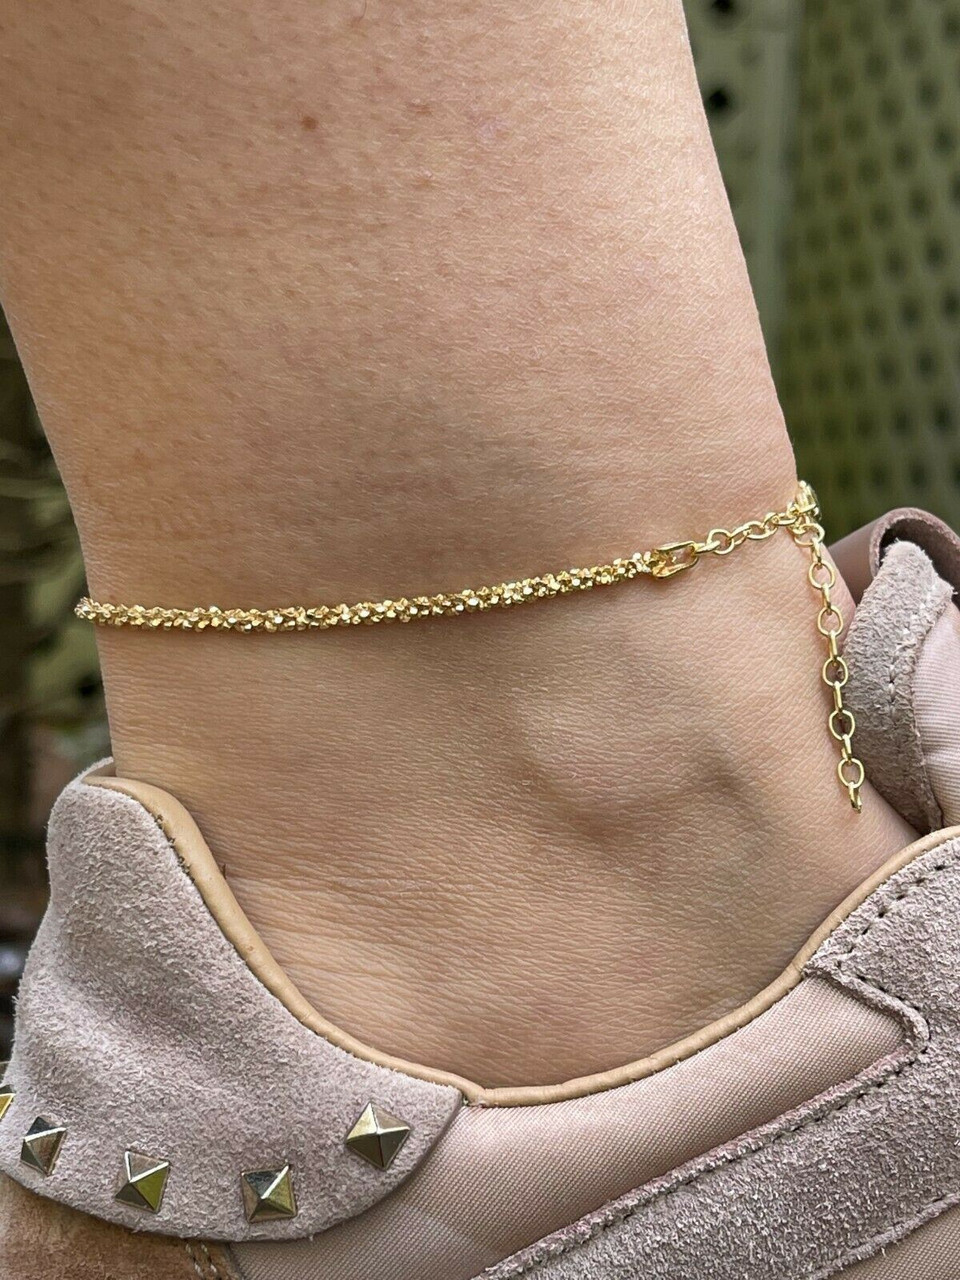 Buy Ankle Bracelets for Women Teen Girls with 14K Real Gold Plated,Summer  Beach Accessories,Gold Anklet Chain with Heart Initial, Cute Letter Chains Anklet  Jewelry Gifts for Wife Girlfriend Daughter BFF Online at